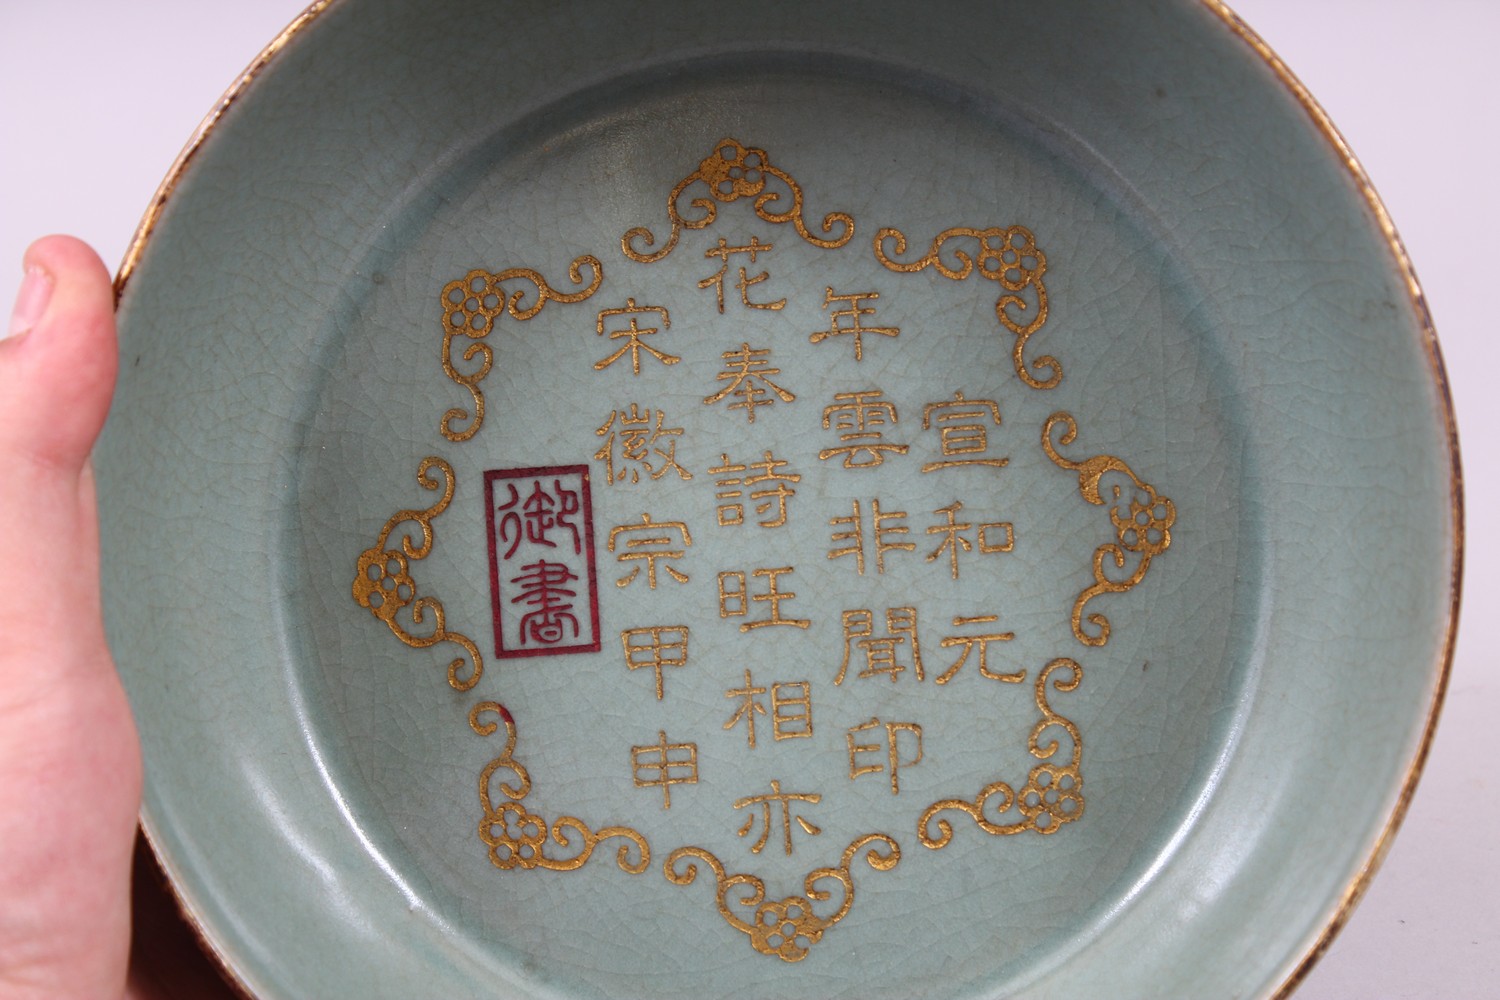 A GOOD CHINESE PORCELAIN RU WARE CELADON COLOURED DISH, the dish with incised chinese calligraphy - Image 2 of 3